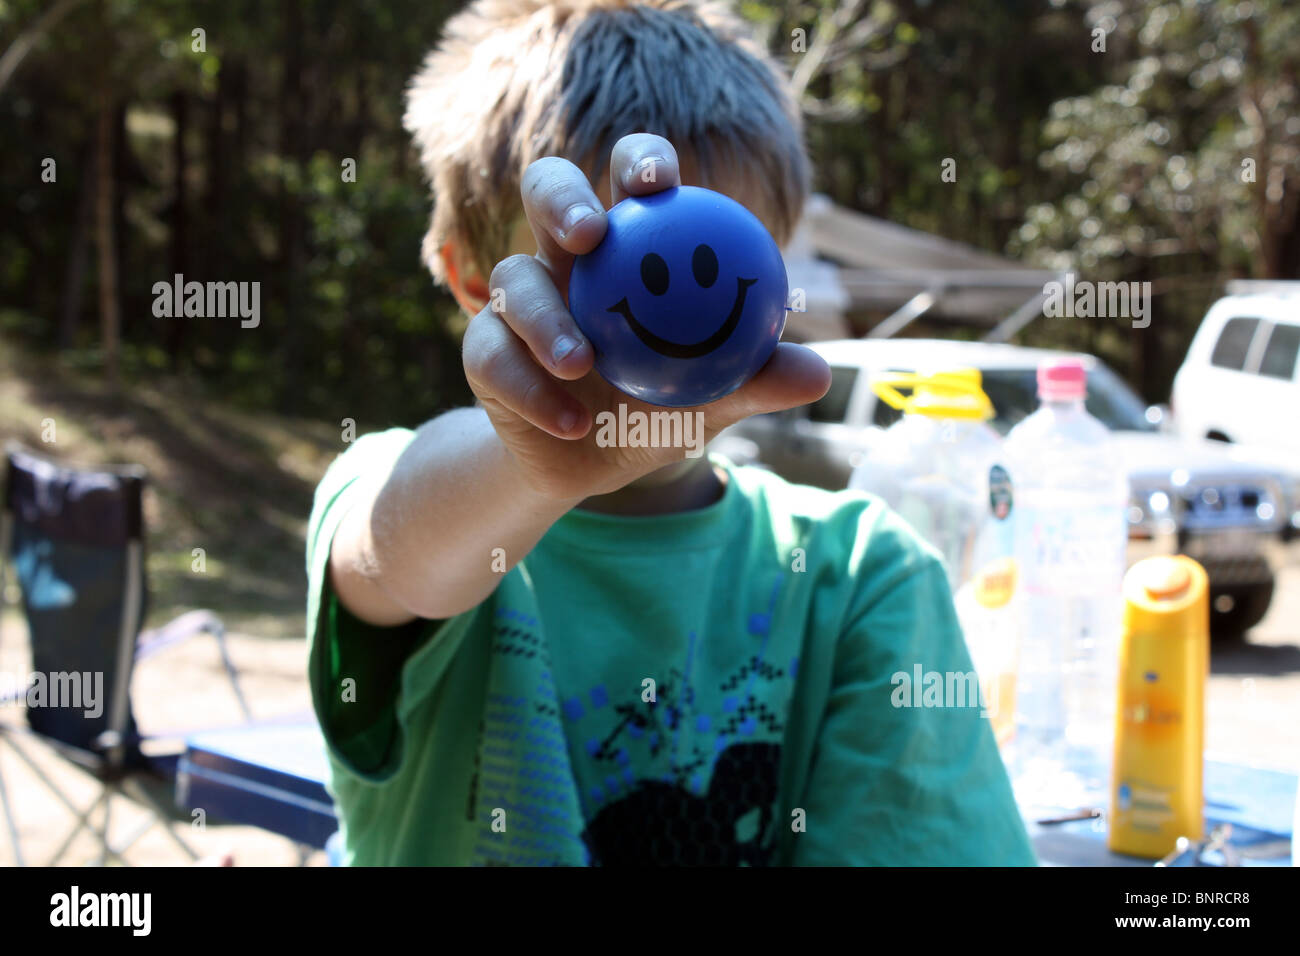 Young boy covering his face with a blue smiley ball Stock Photo